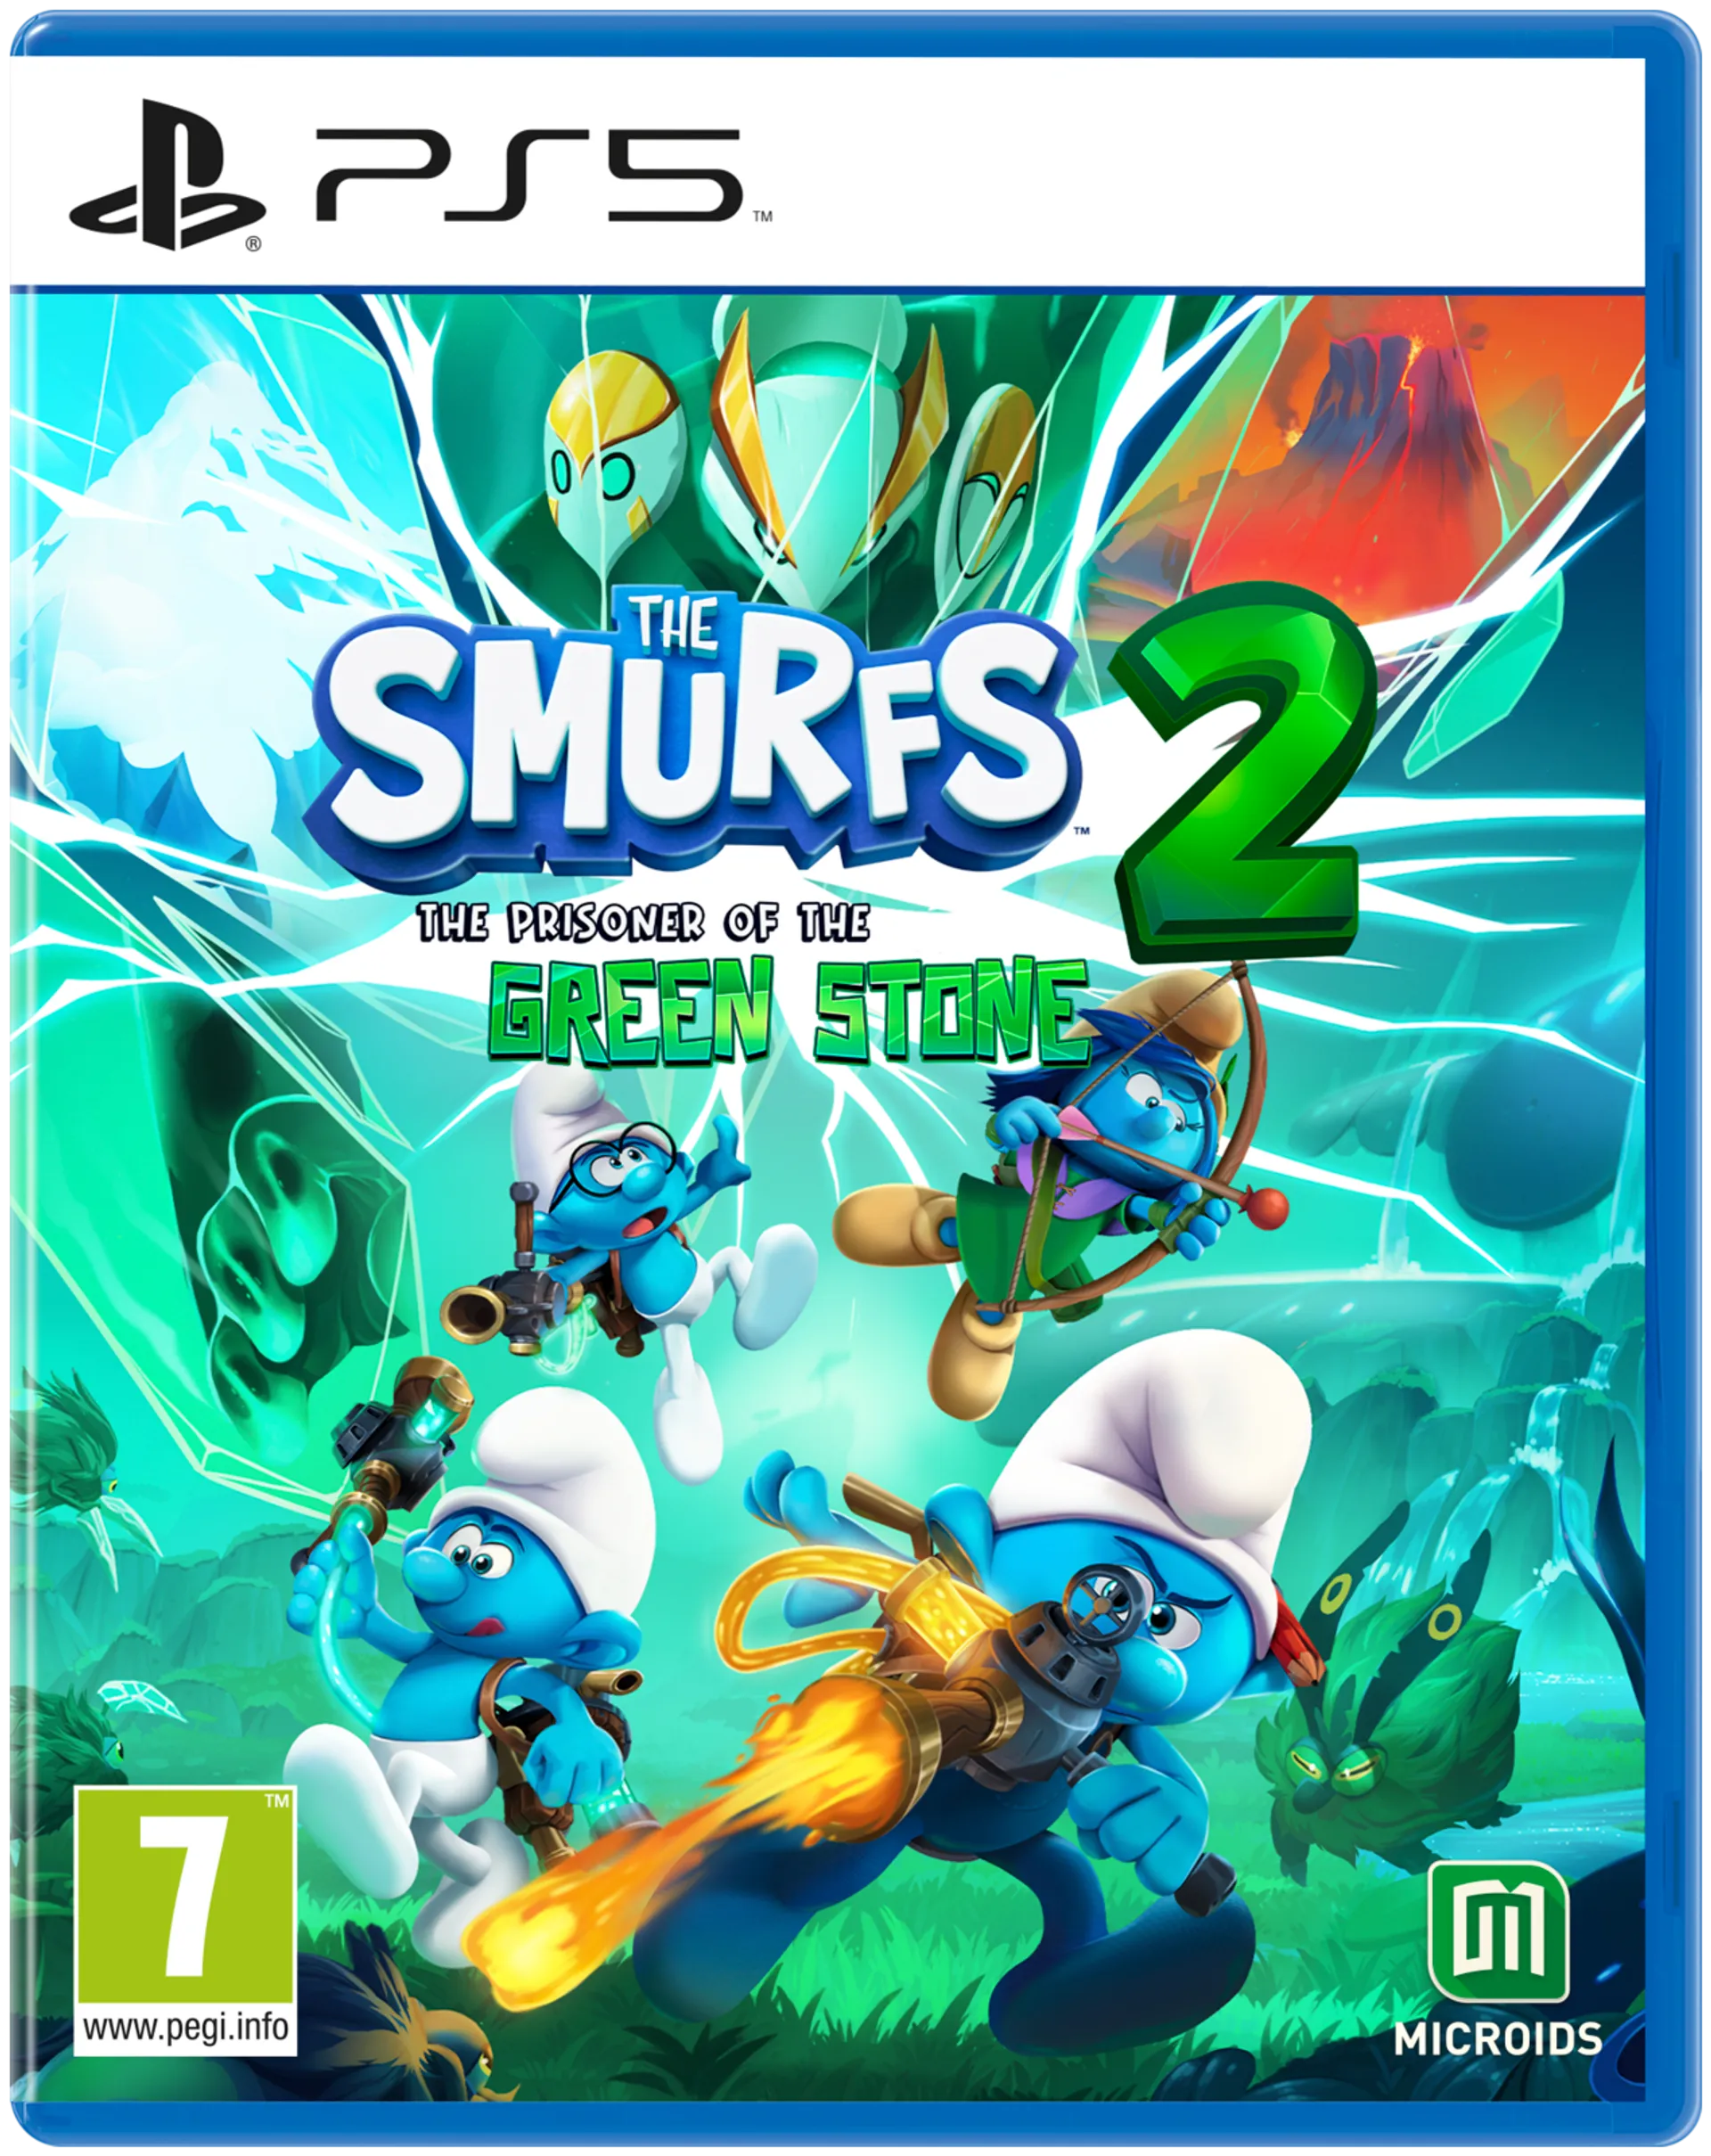 PS5 The Smurfs 2 Green stone